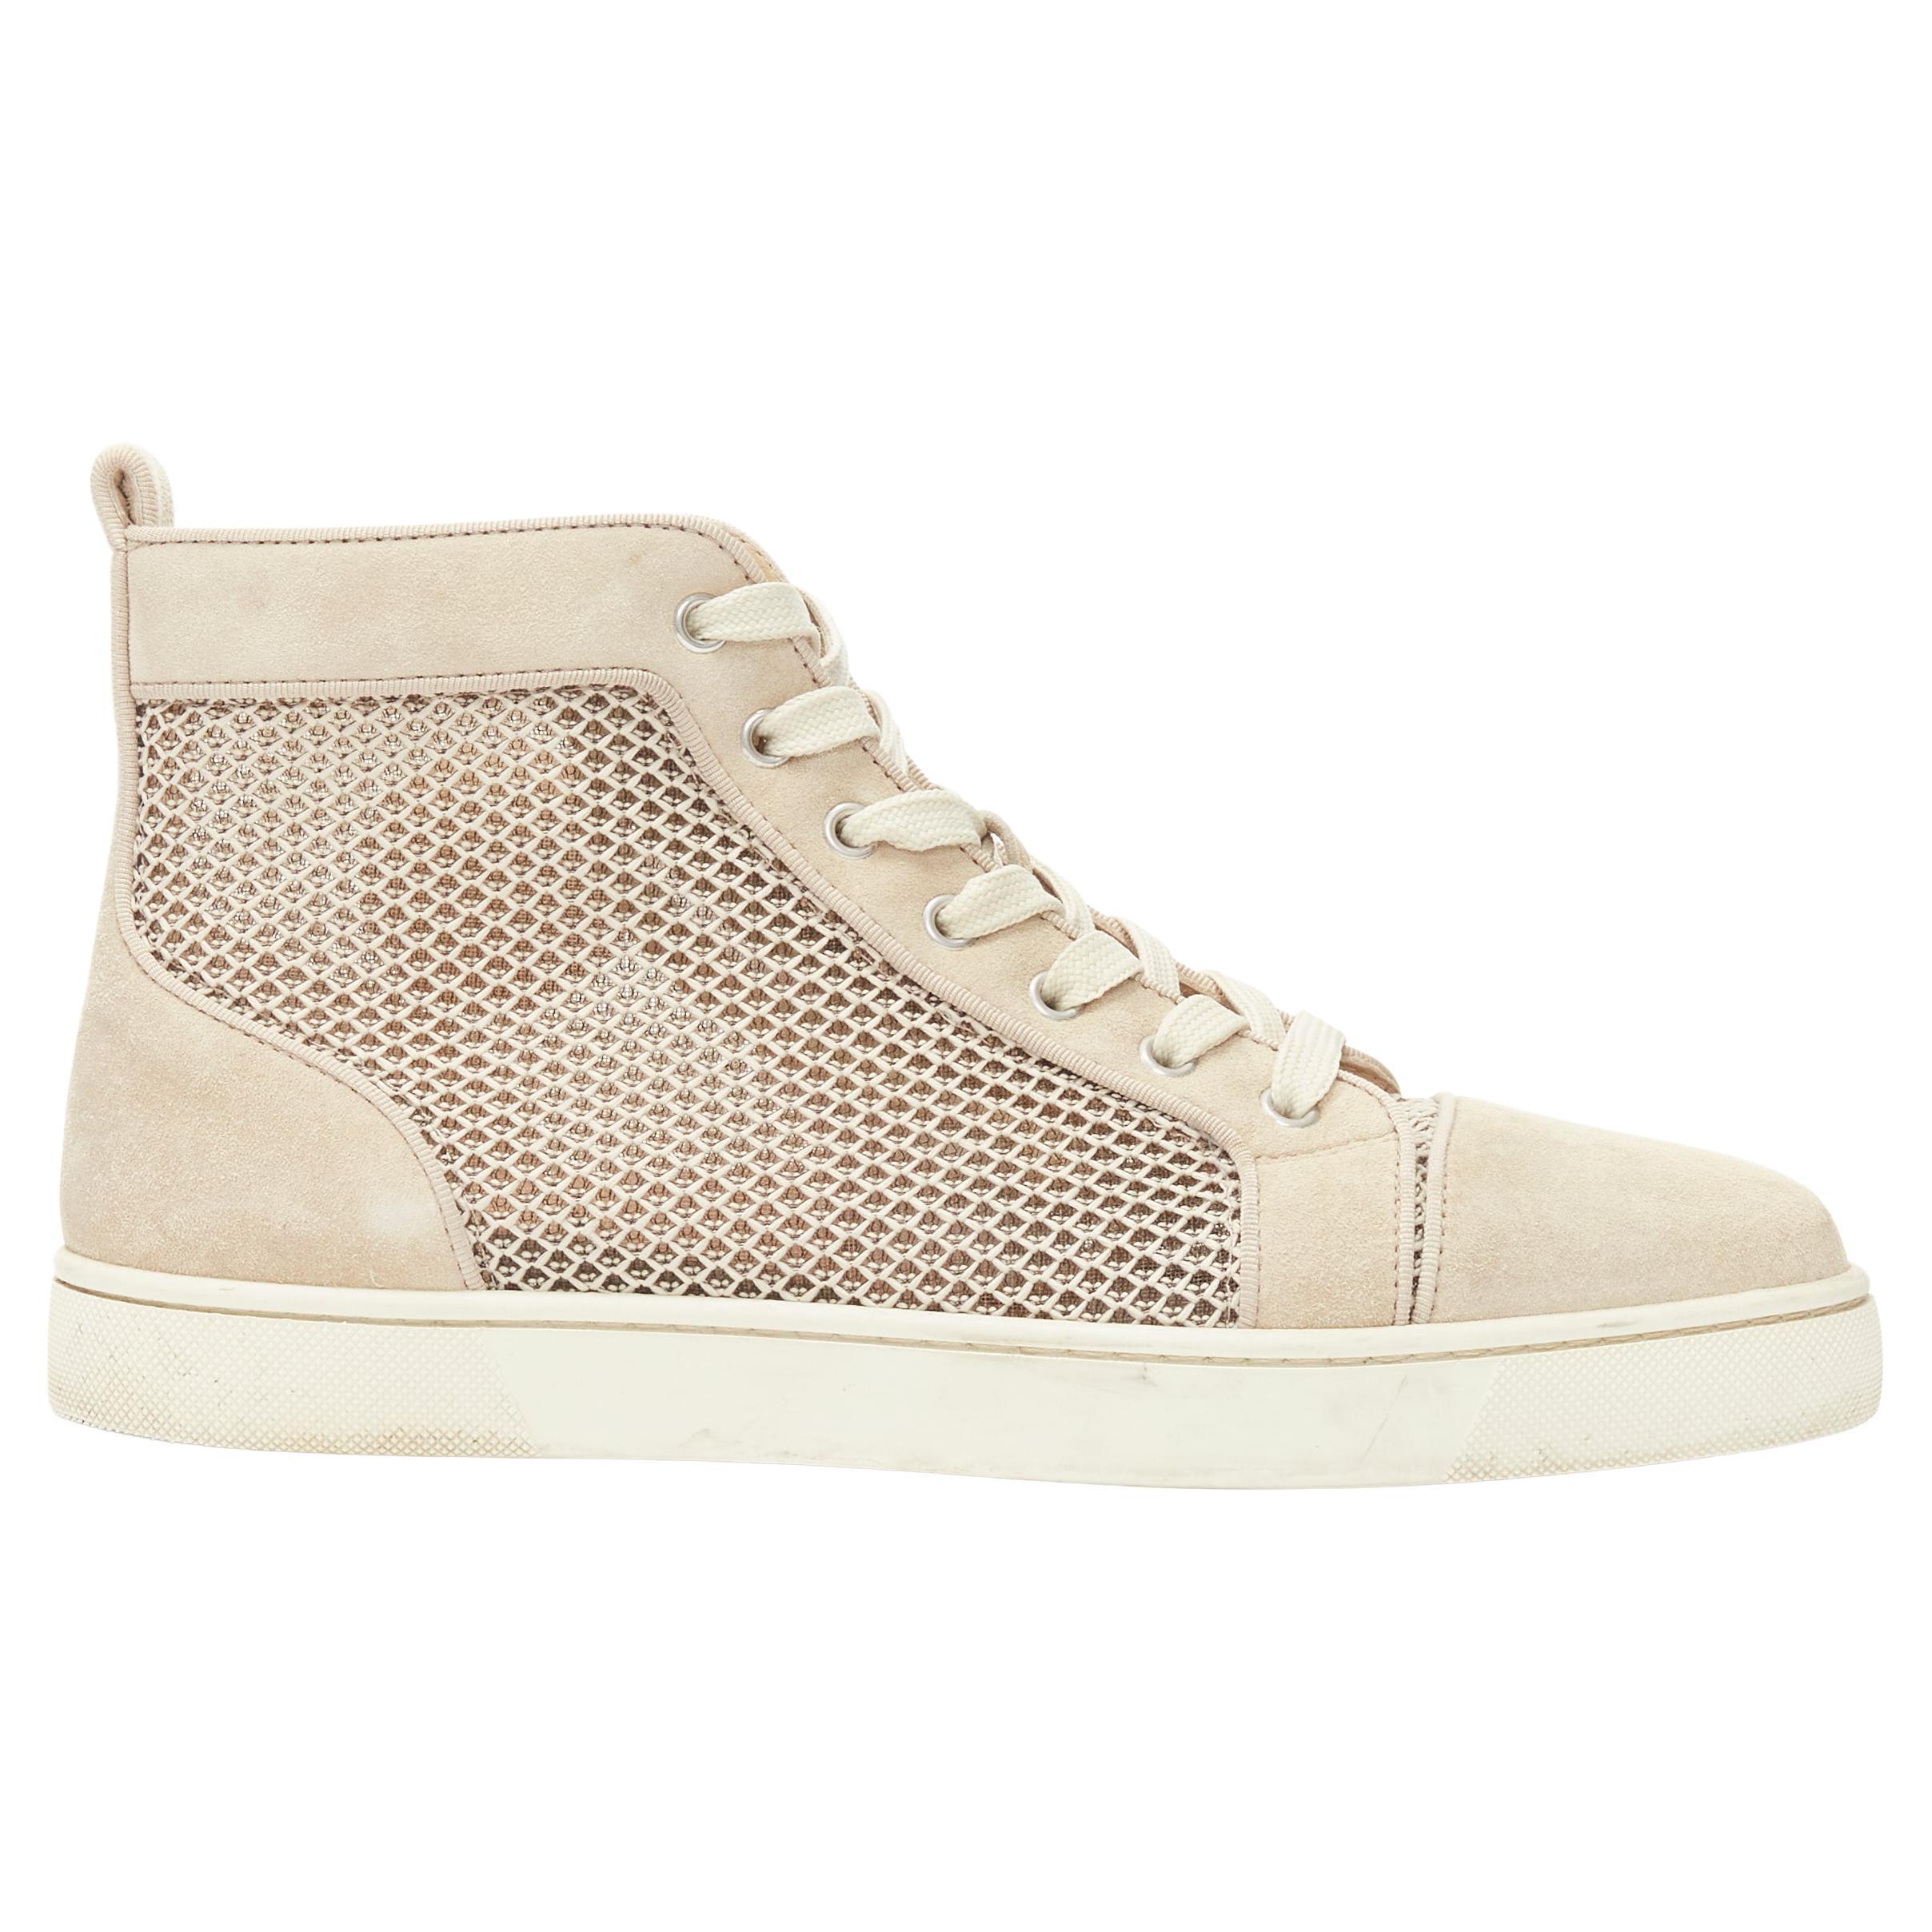 Louis - High-top sneakers - Calf leather - White - Christian Louboutin